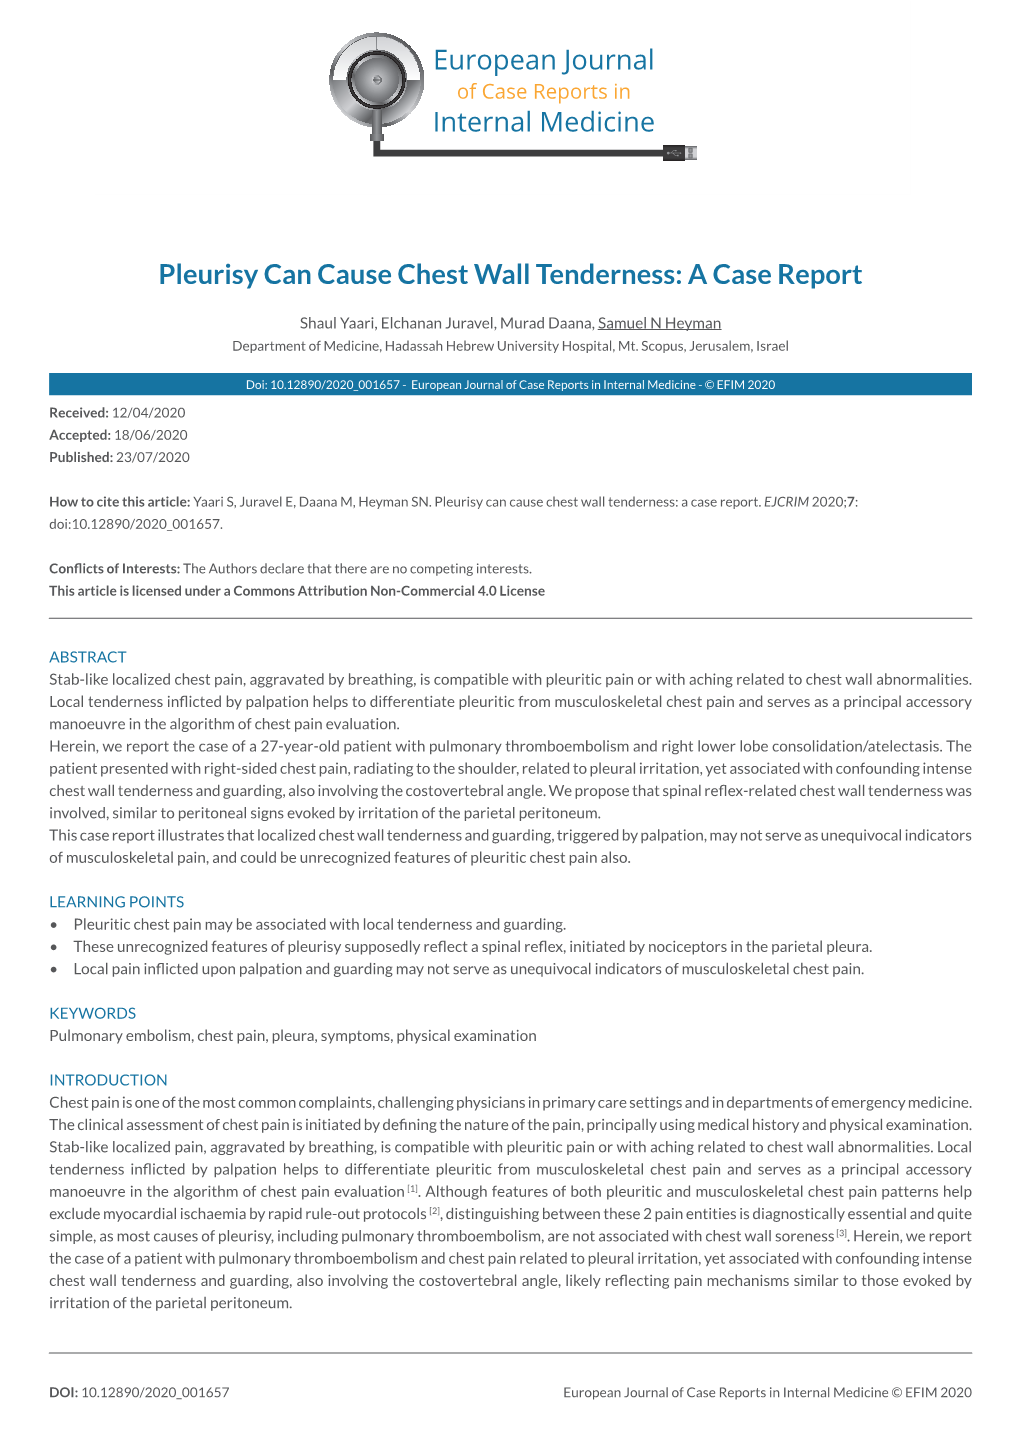 Pleurisy Can Cause Chest Wall Tenderness: a Case Report